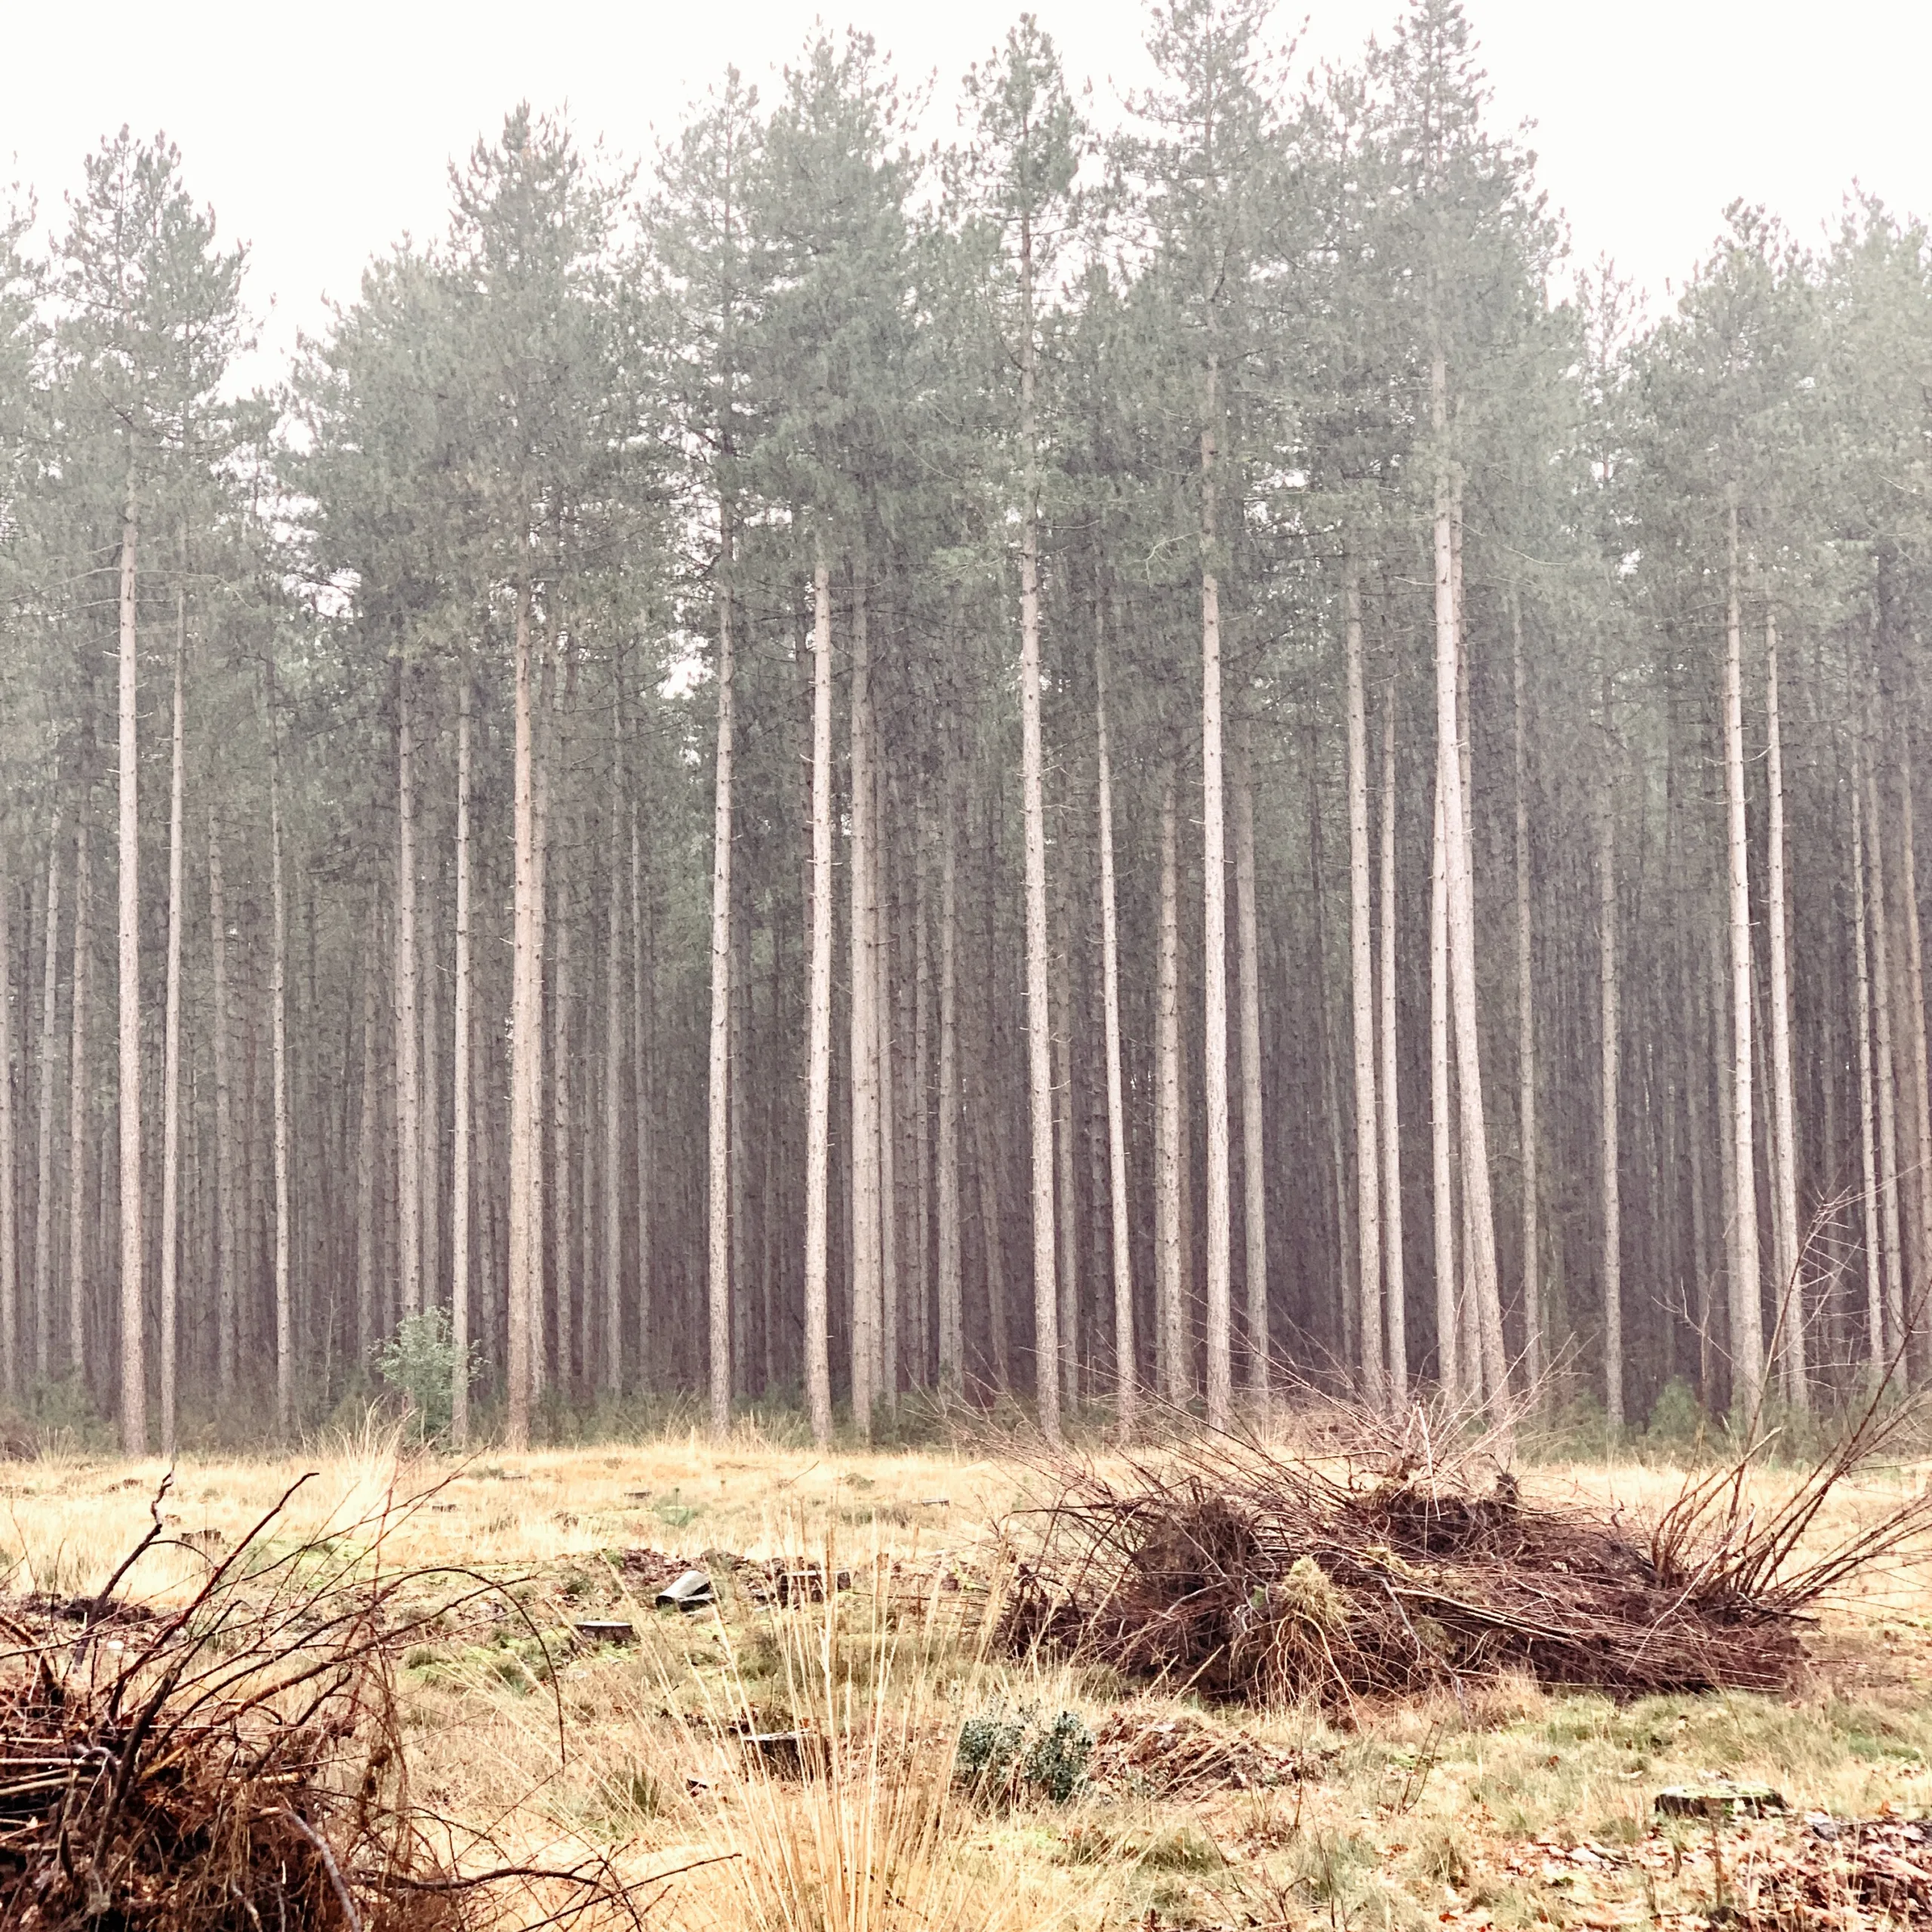 A misty forest scene with tall, thin trees and a pile of branches in the foreground at Hoge Kempen National Park